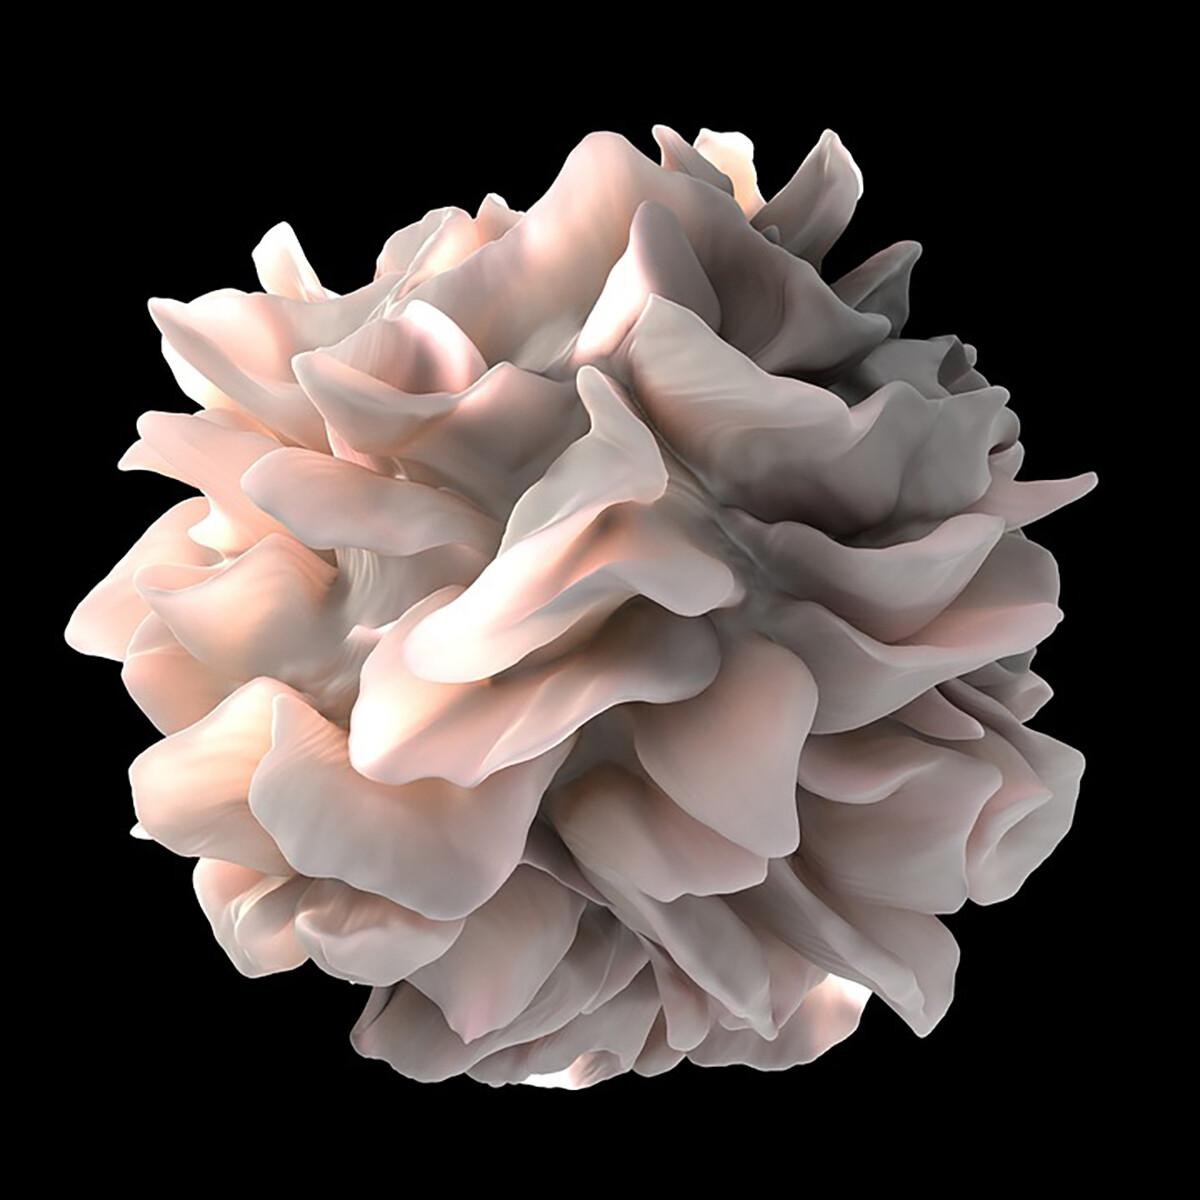 Dendritic cell magnified